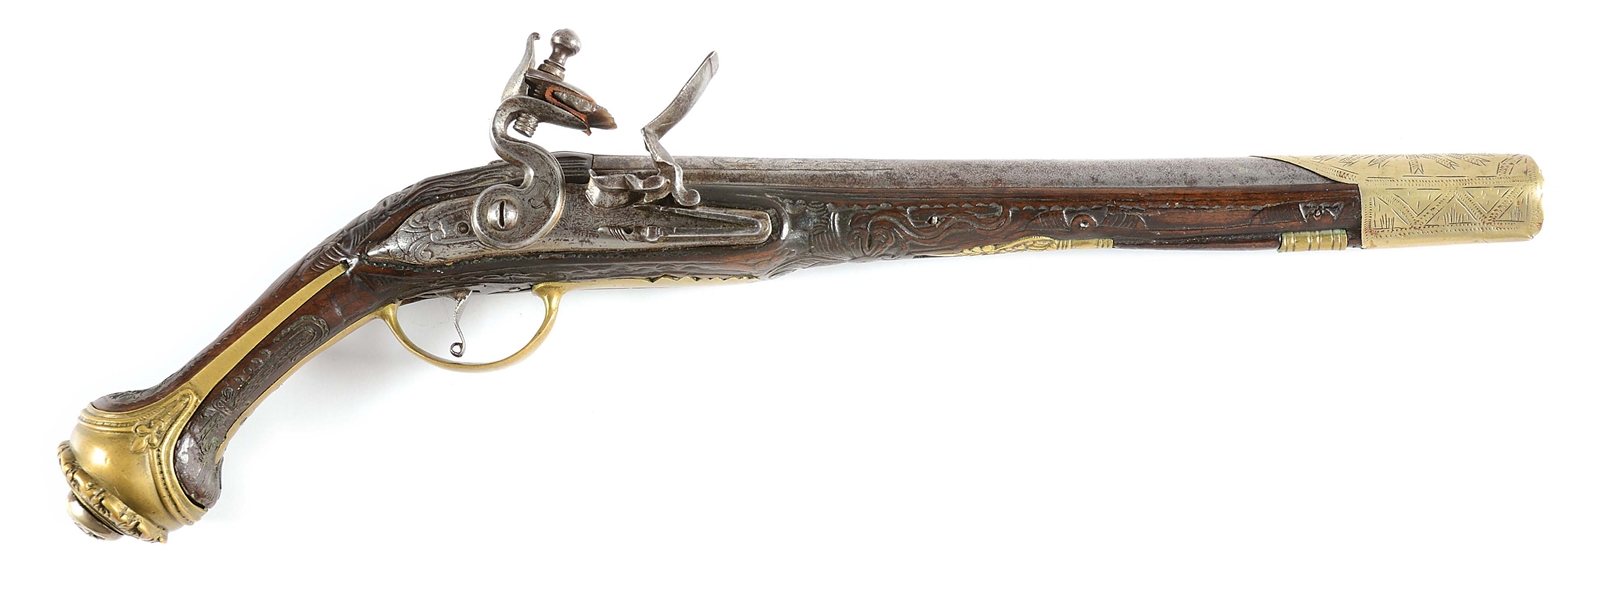 (A) ENGRAVED OTTOMAN FLINTLOCK PISTOL WITH CARVED STOCK.